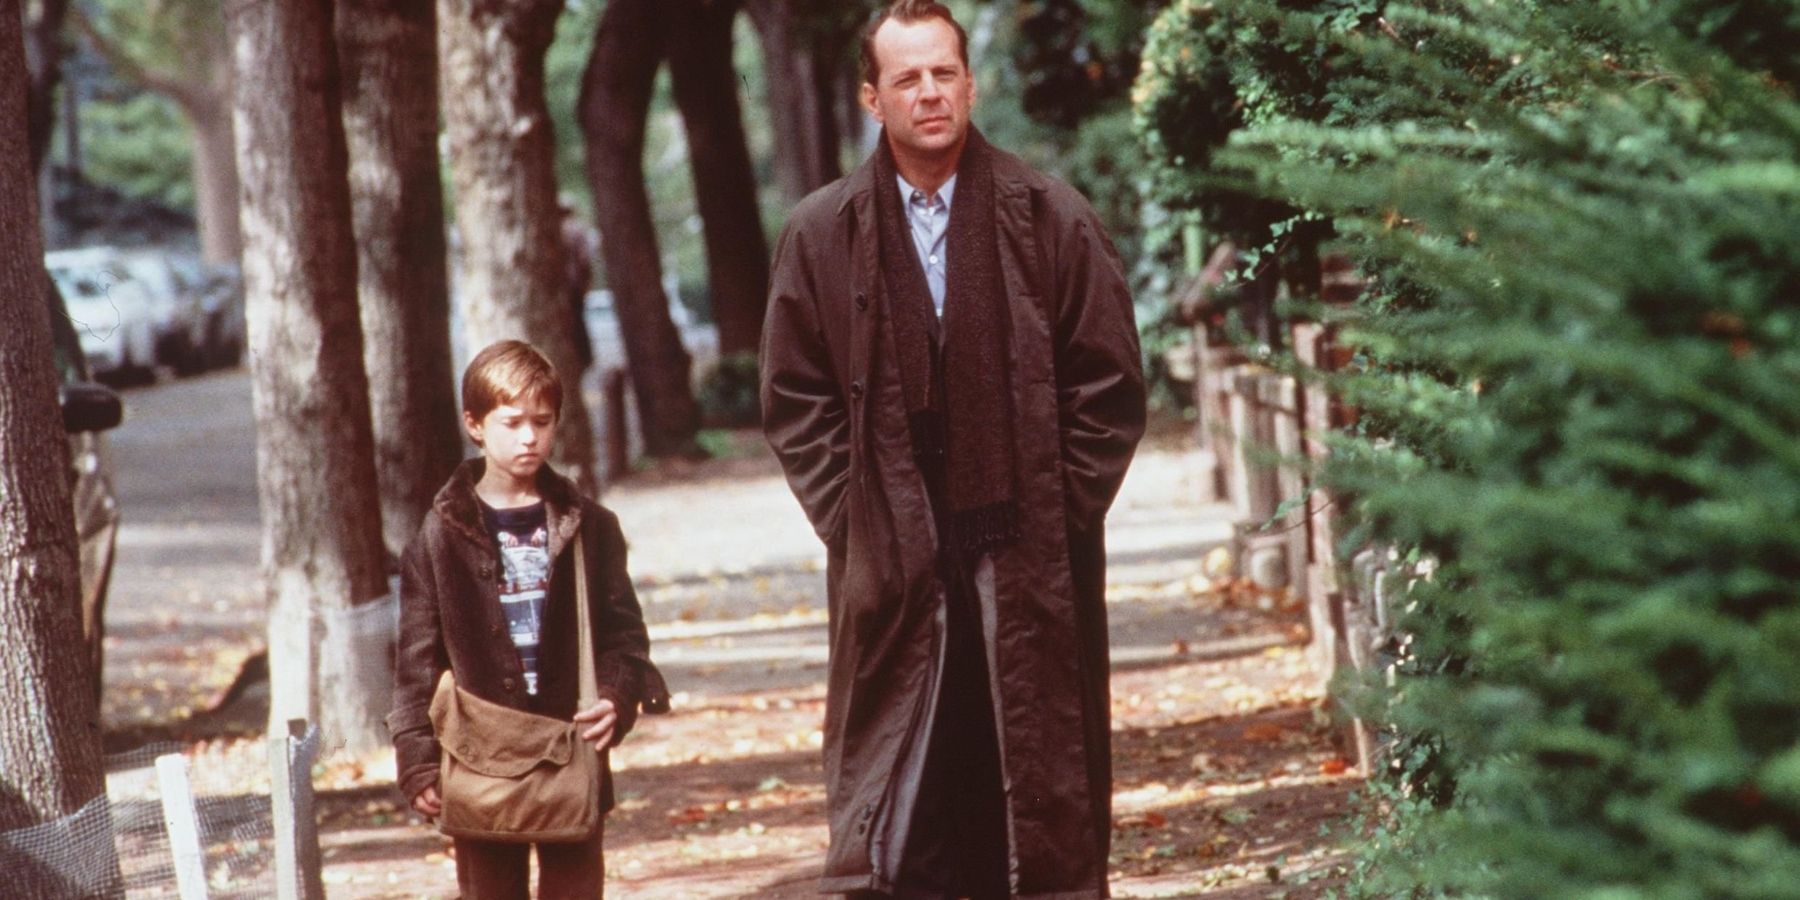 Haley Joel Osment as Cole and Bruce Willis as Malcolm walking outside together in The Sixth Sense